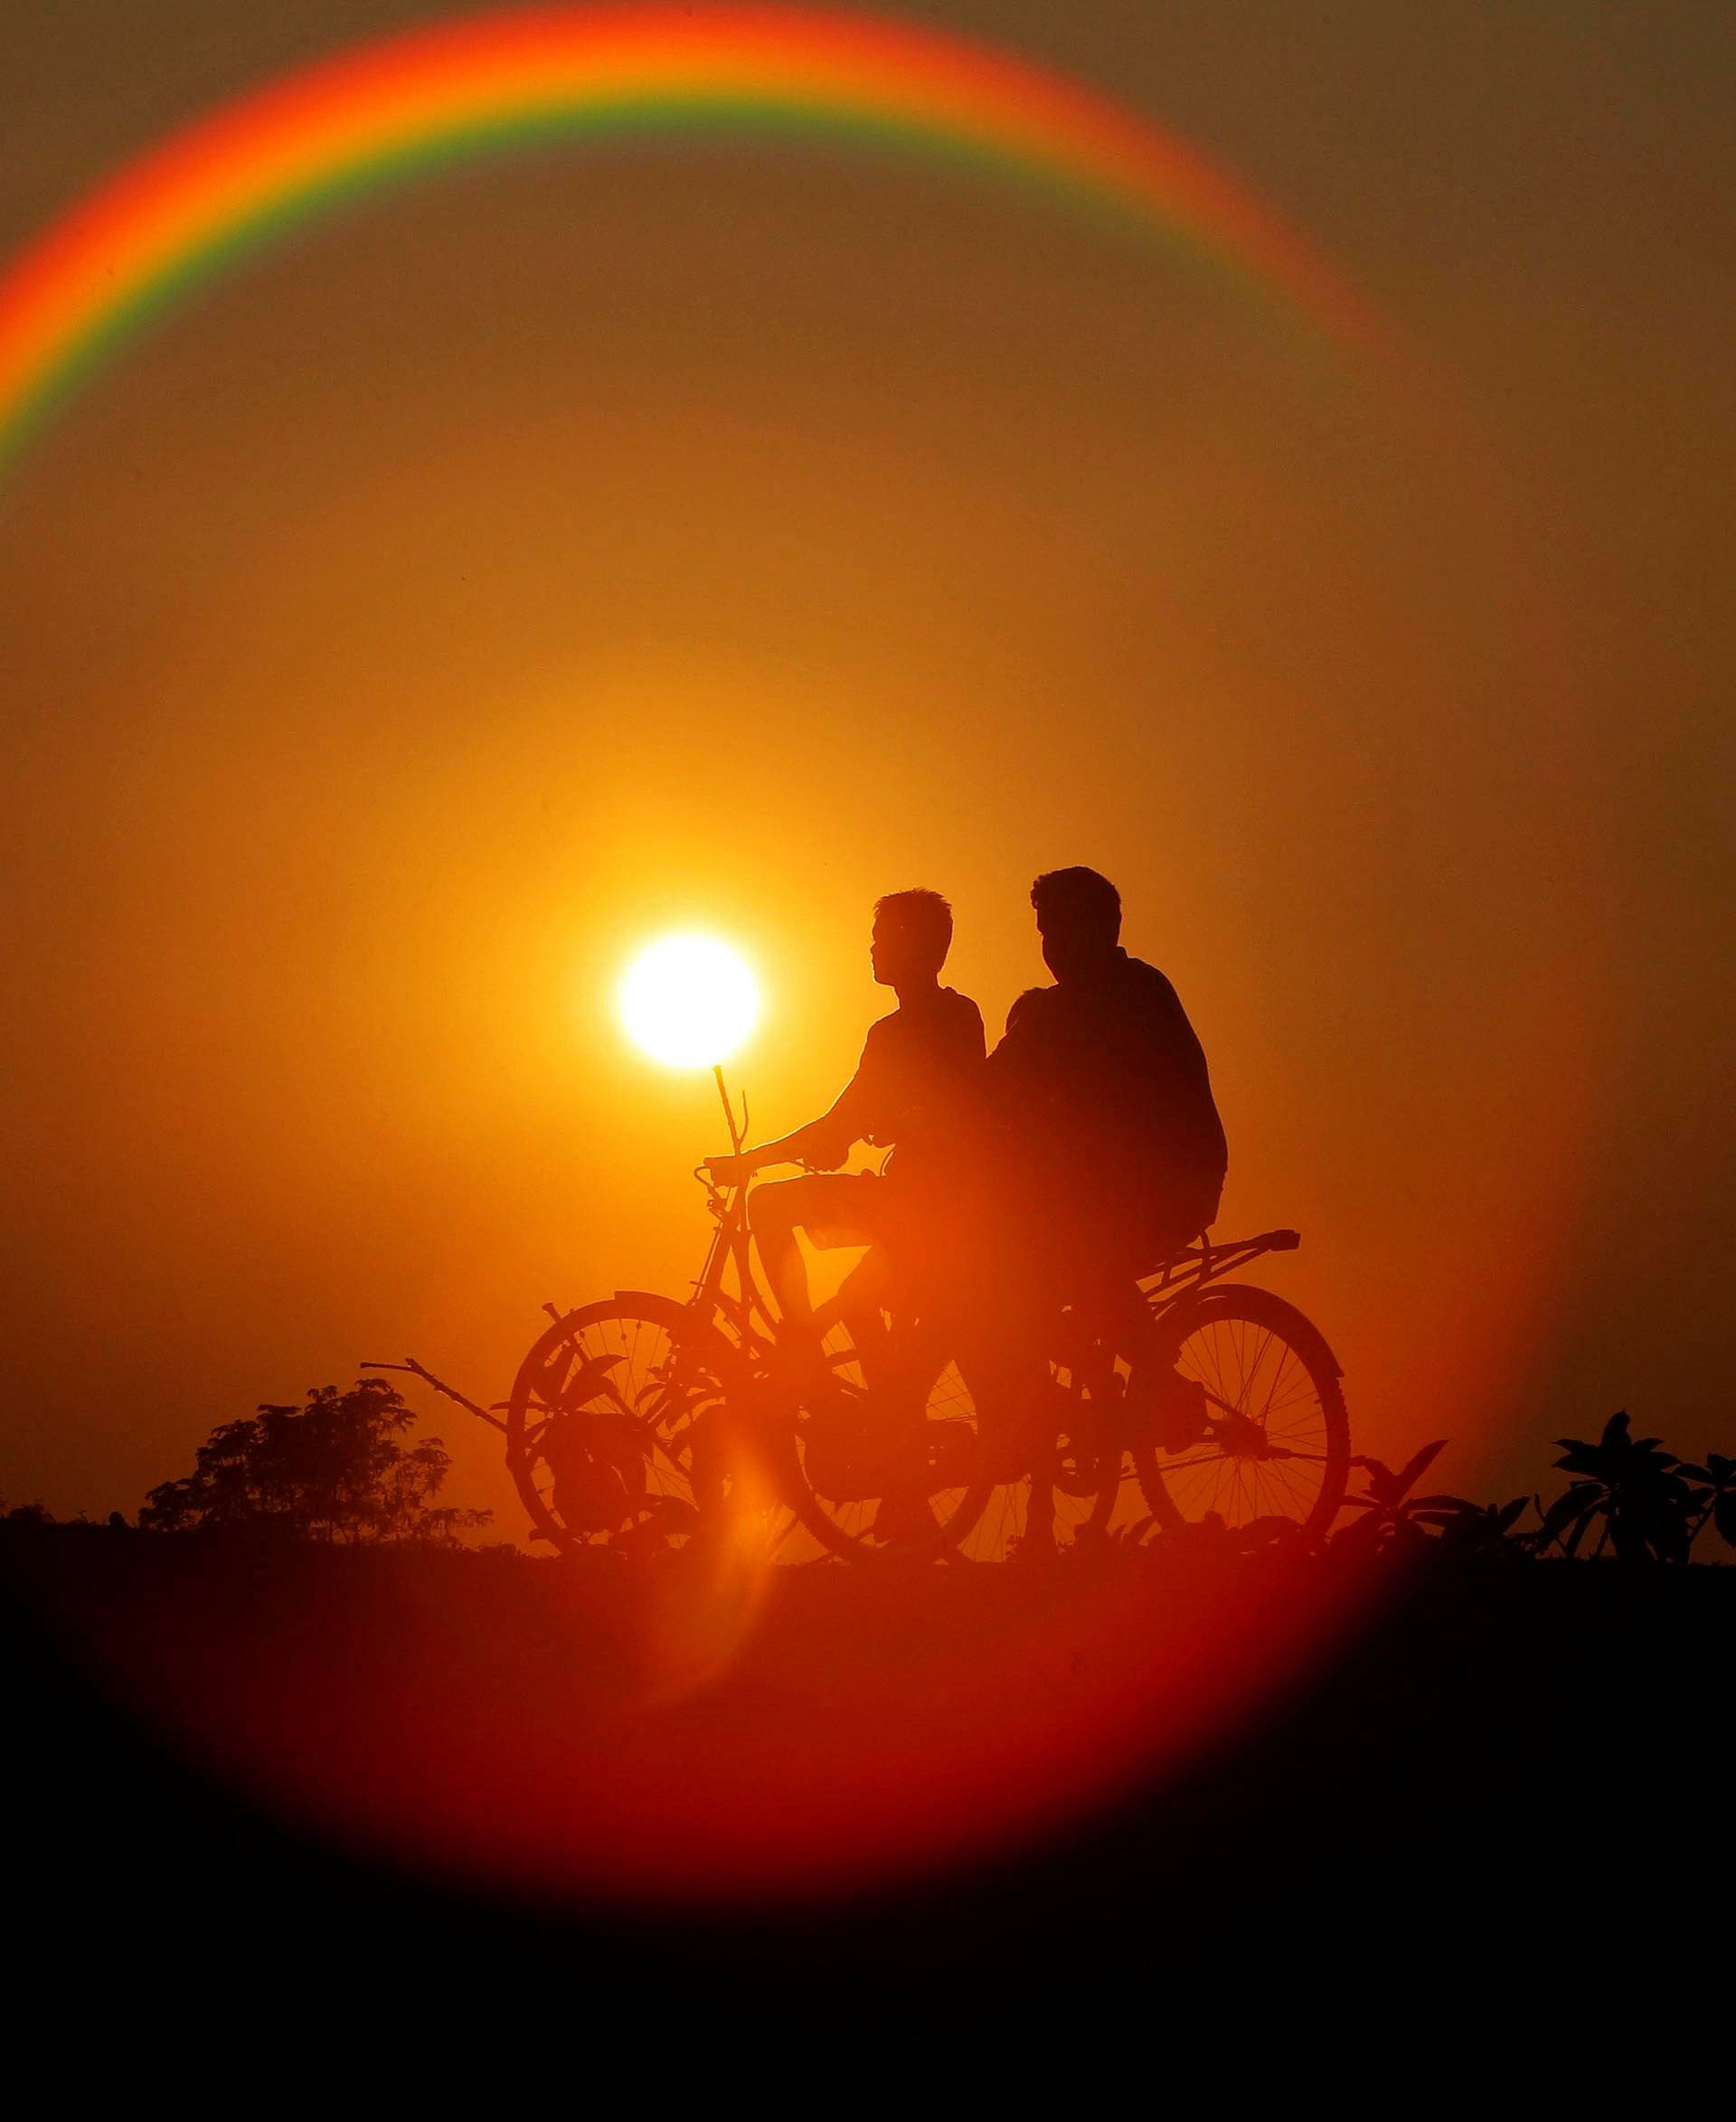 Boys are silhouetted against the setting sun as they ride bicycles on the outskirts of Agartala